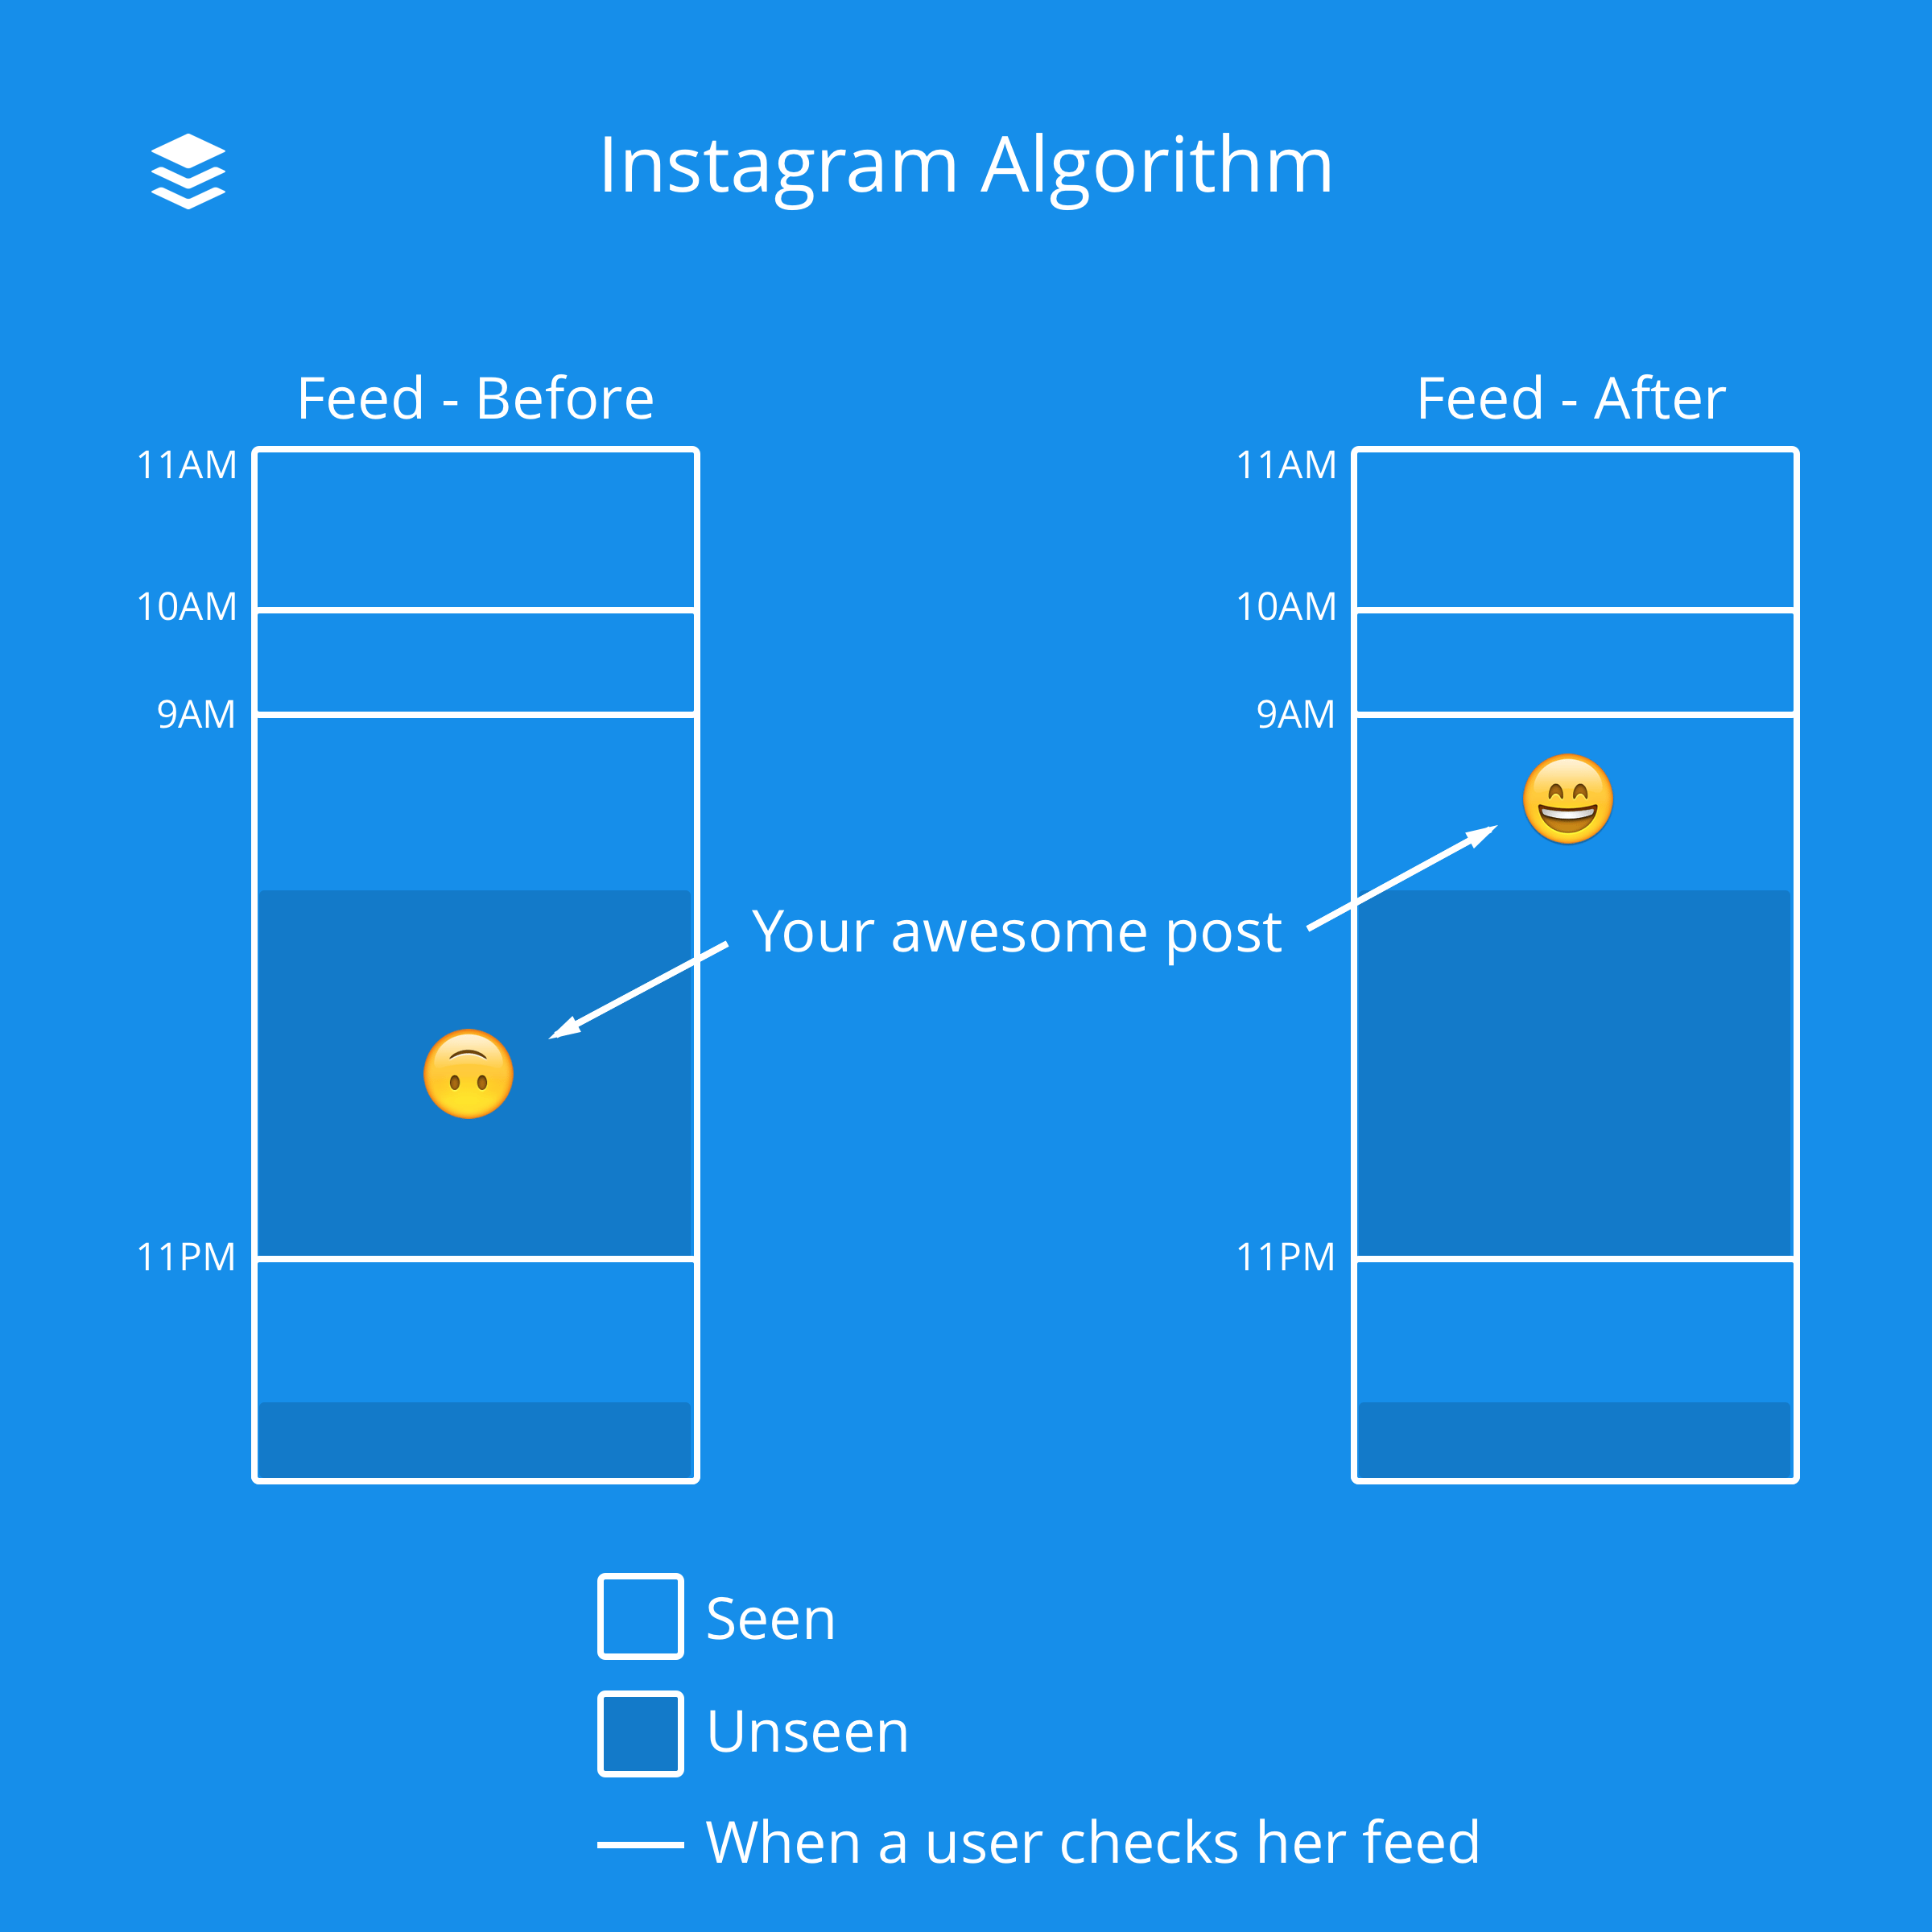 Instagram Algorithm - Feed Before and After